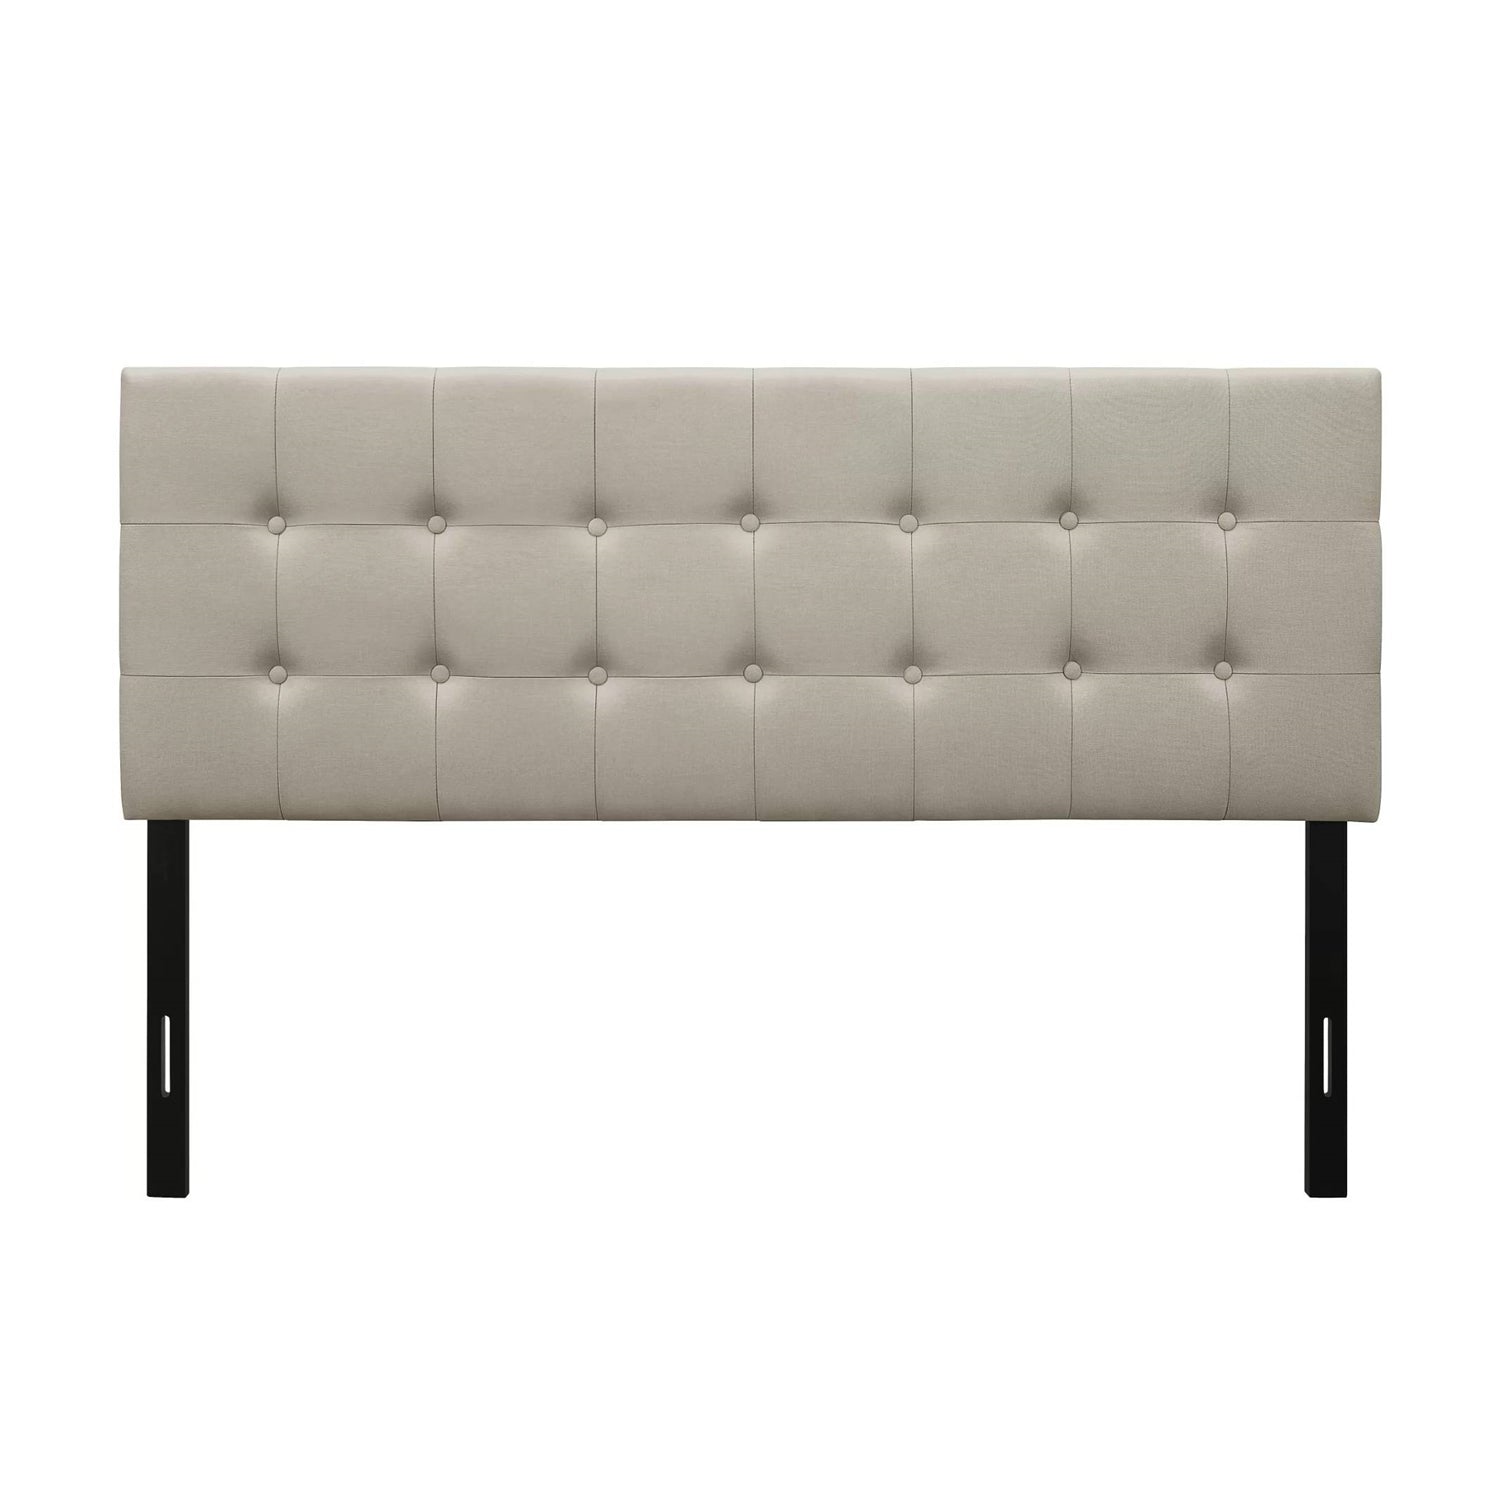 Full size Button-Tufted Headboard in Light Grey Taupe Beige Upholstered Fabric